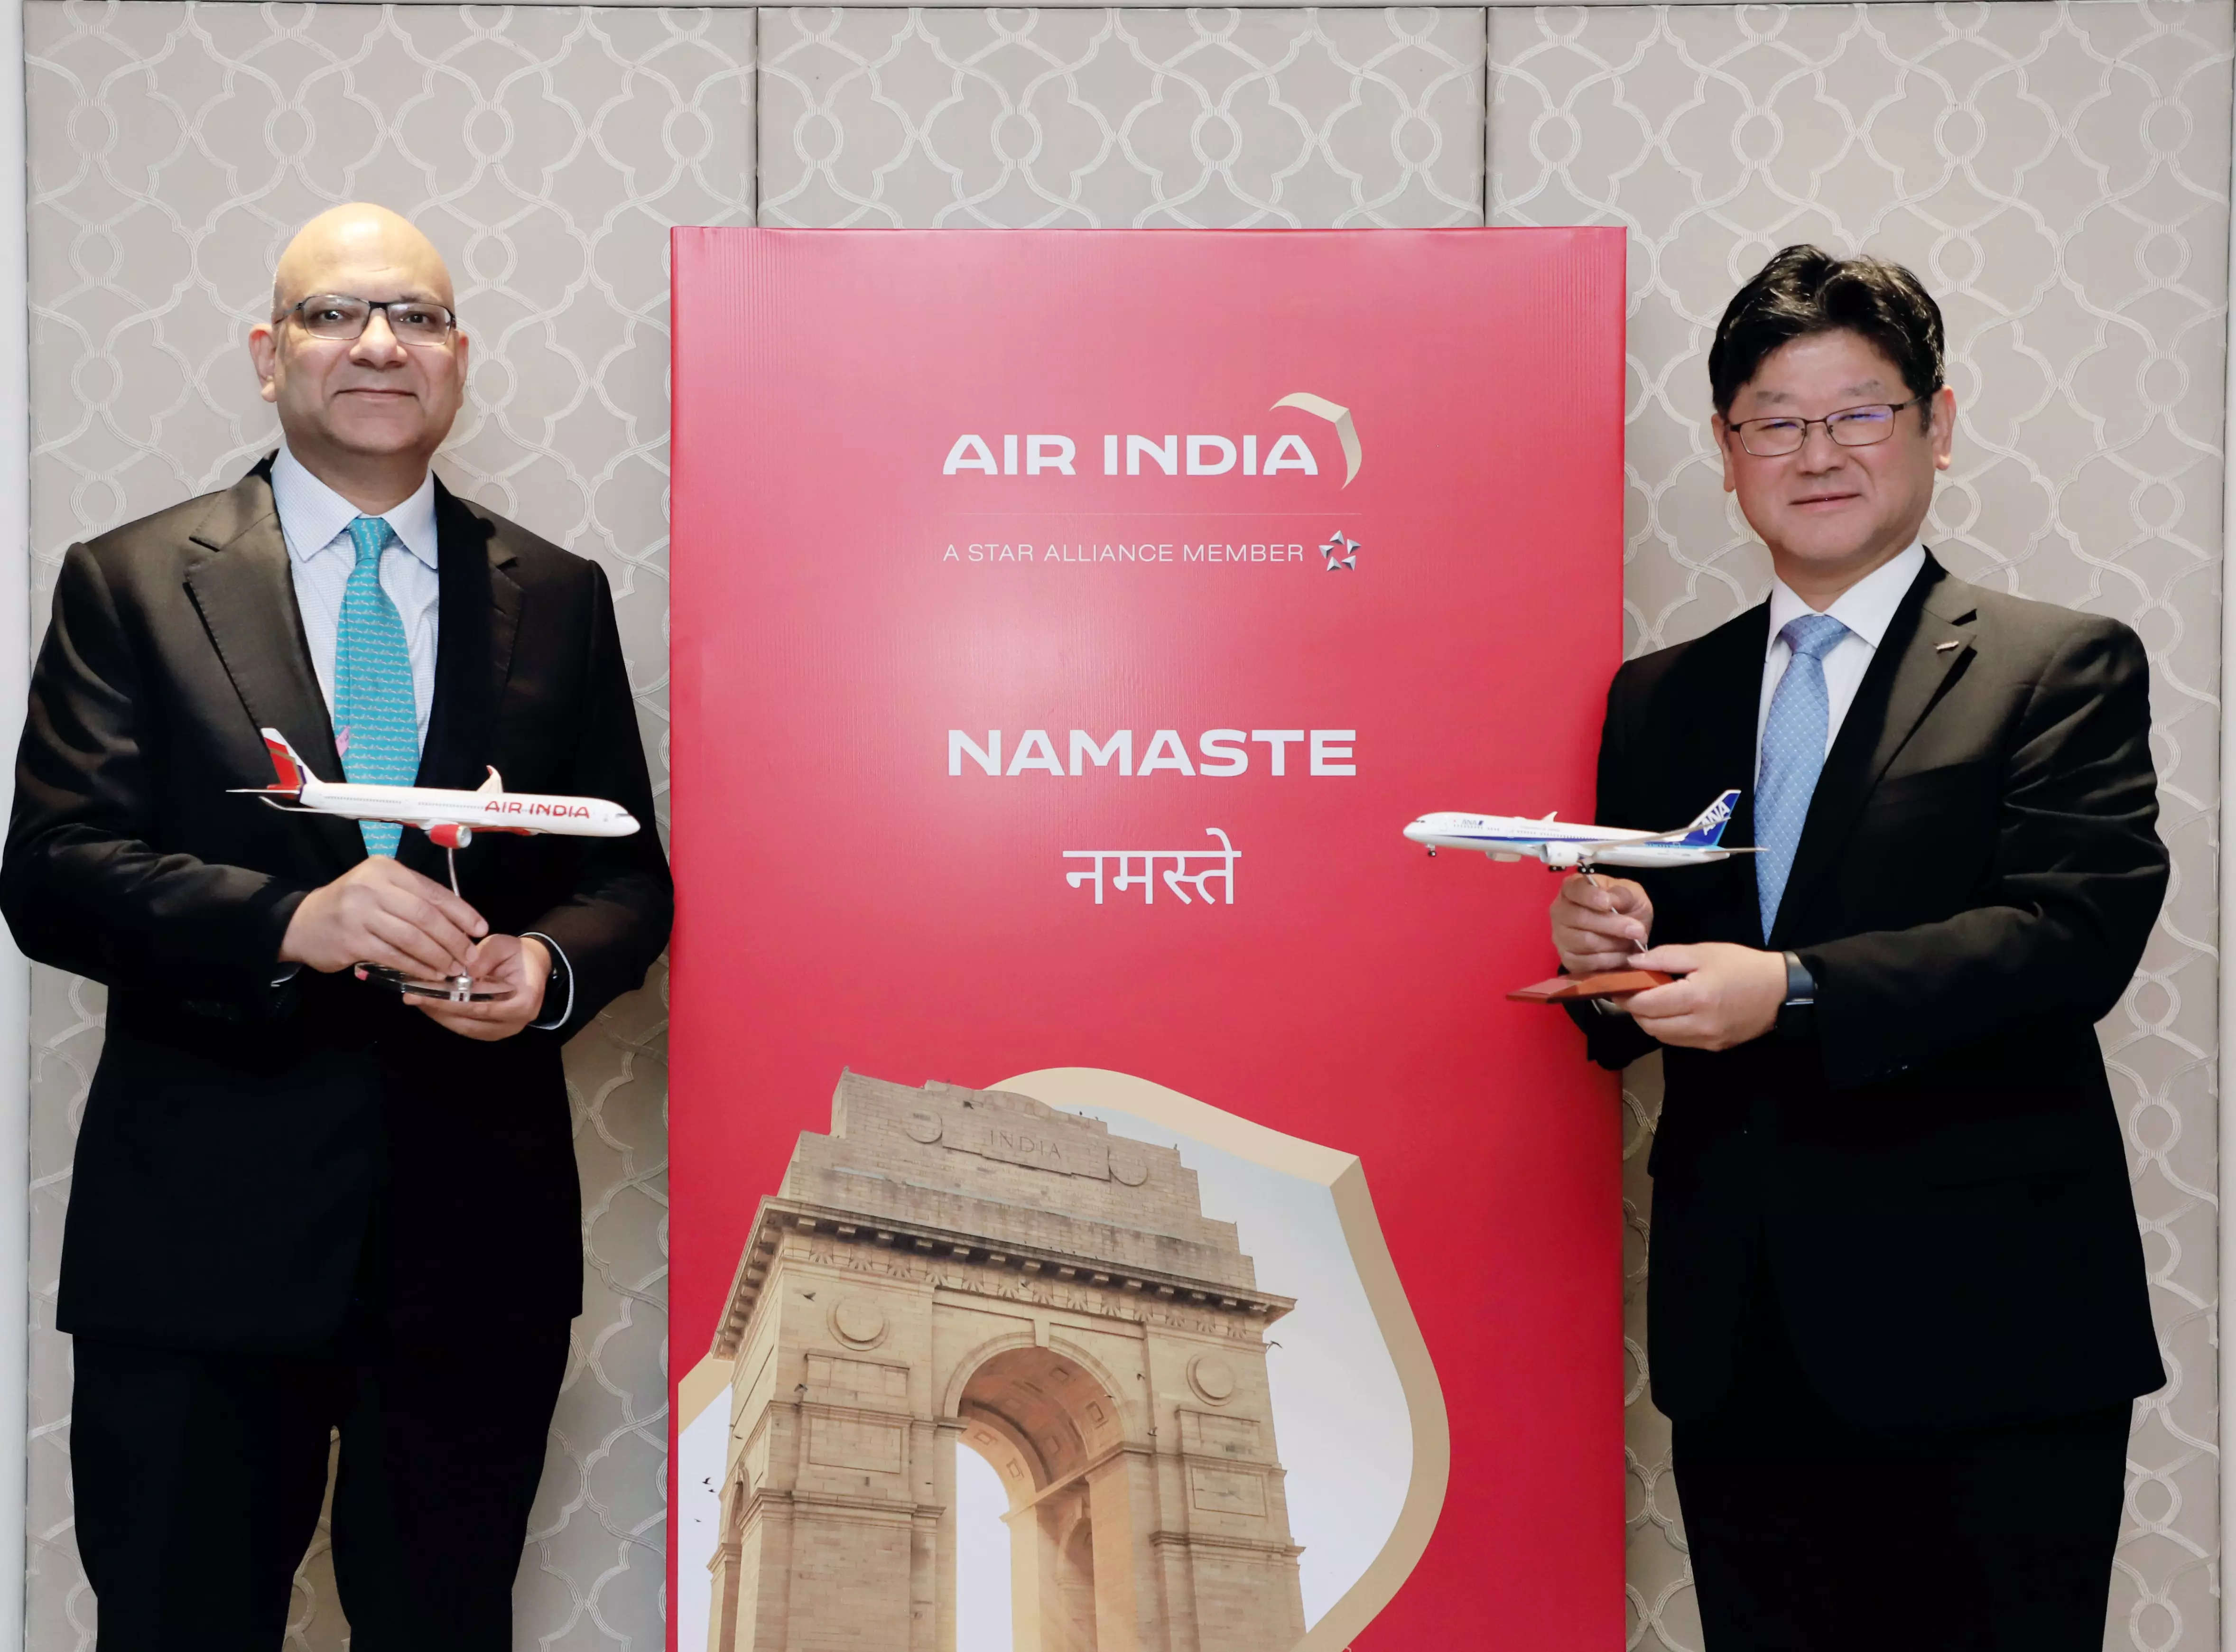 <p><span class="il">Air</span> <span class="il">India</span>’s Chief Commercial &amp; Transformation Officer, Nipun Aggarwal, and ANA’s Member of the Board and EVP Alliances &amp; International Affairs, Katsuya Goto, at the signing ceremony of the codeshare partnership.</p>